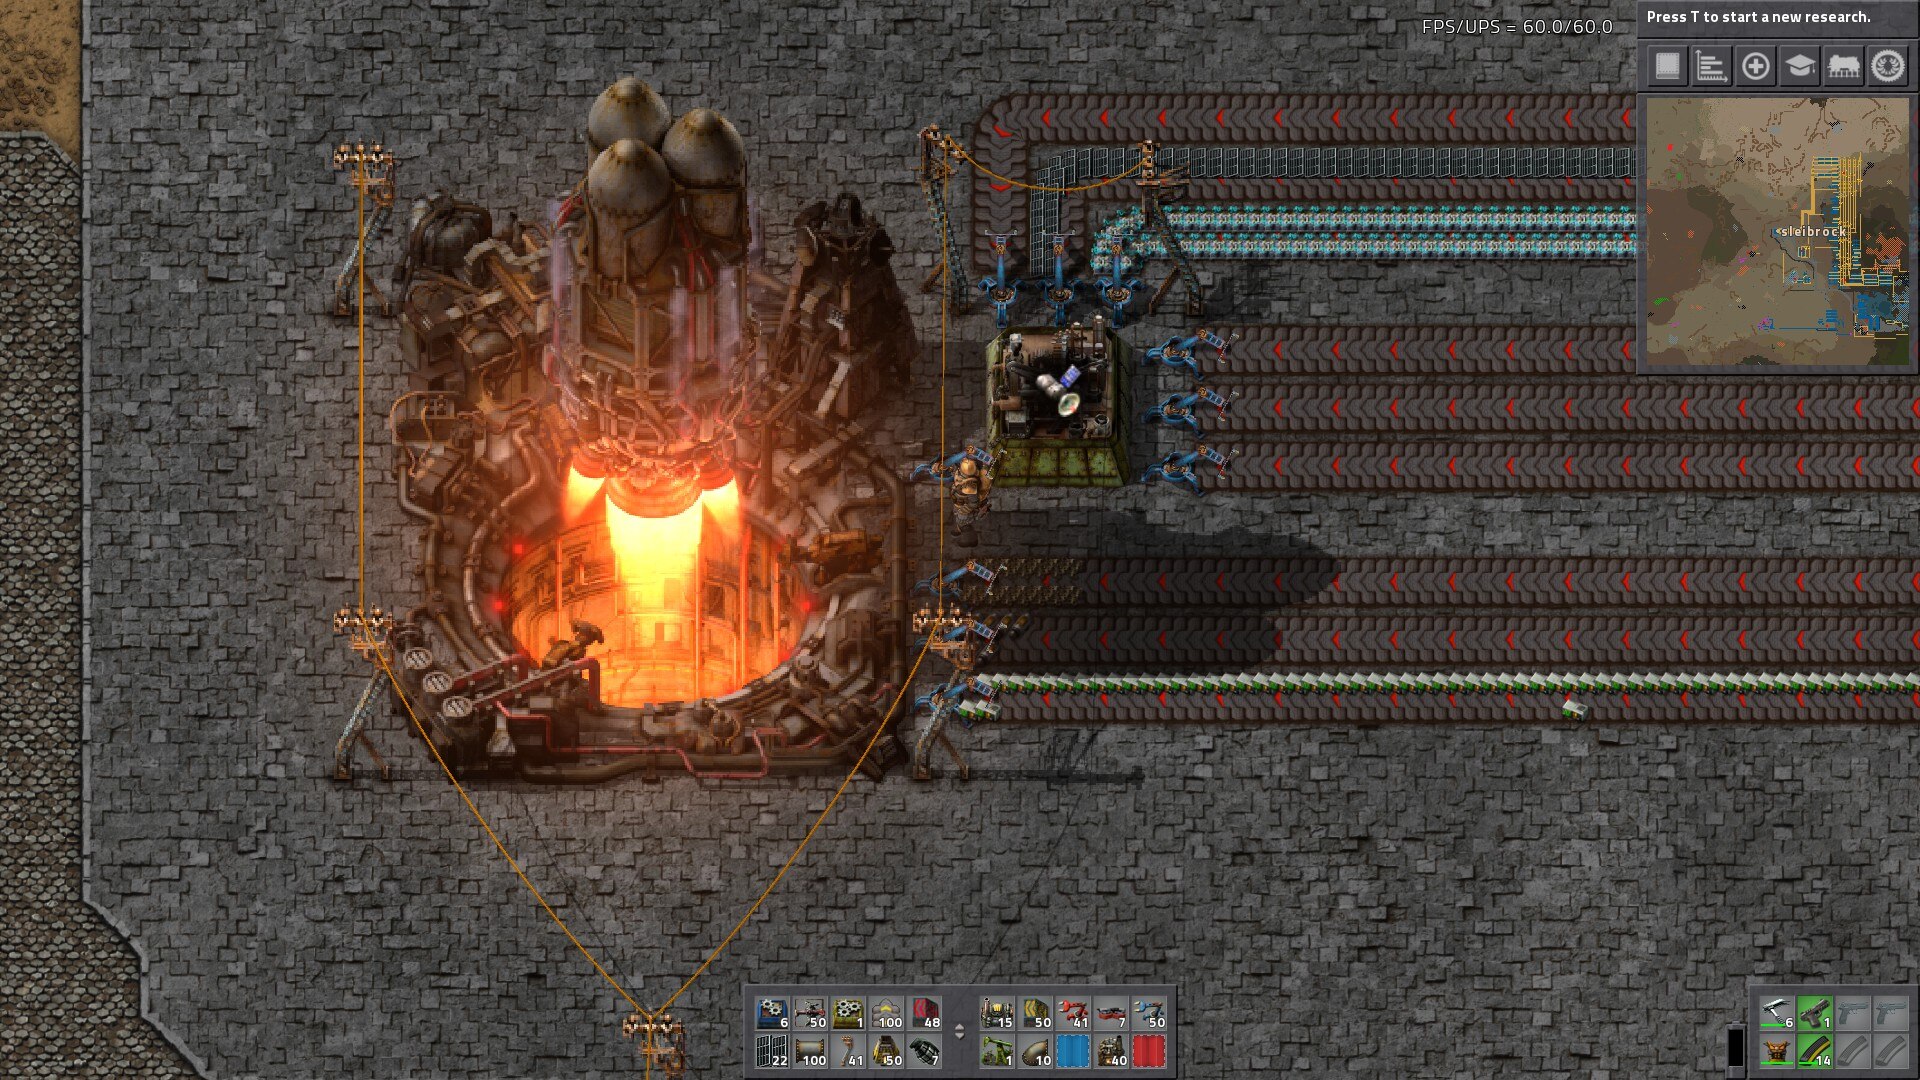 Threads are a lot like conveyor belts, delivering rocket parts to a rocket silo. Yes I am using [Factorio](https://factorio.com/) as a teaching guide.